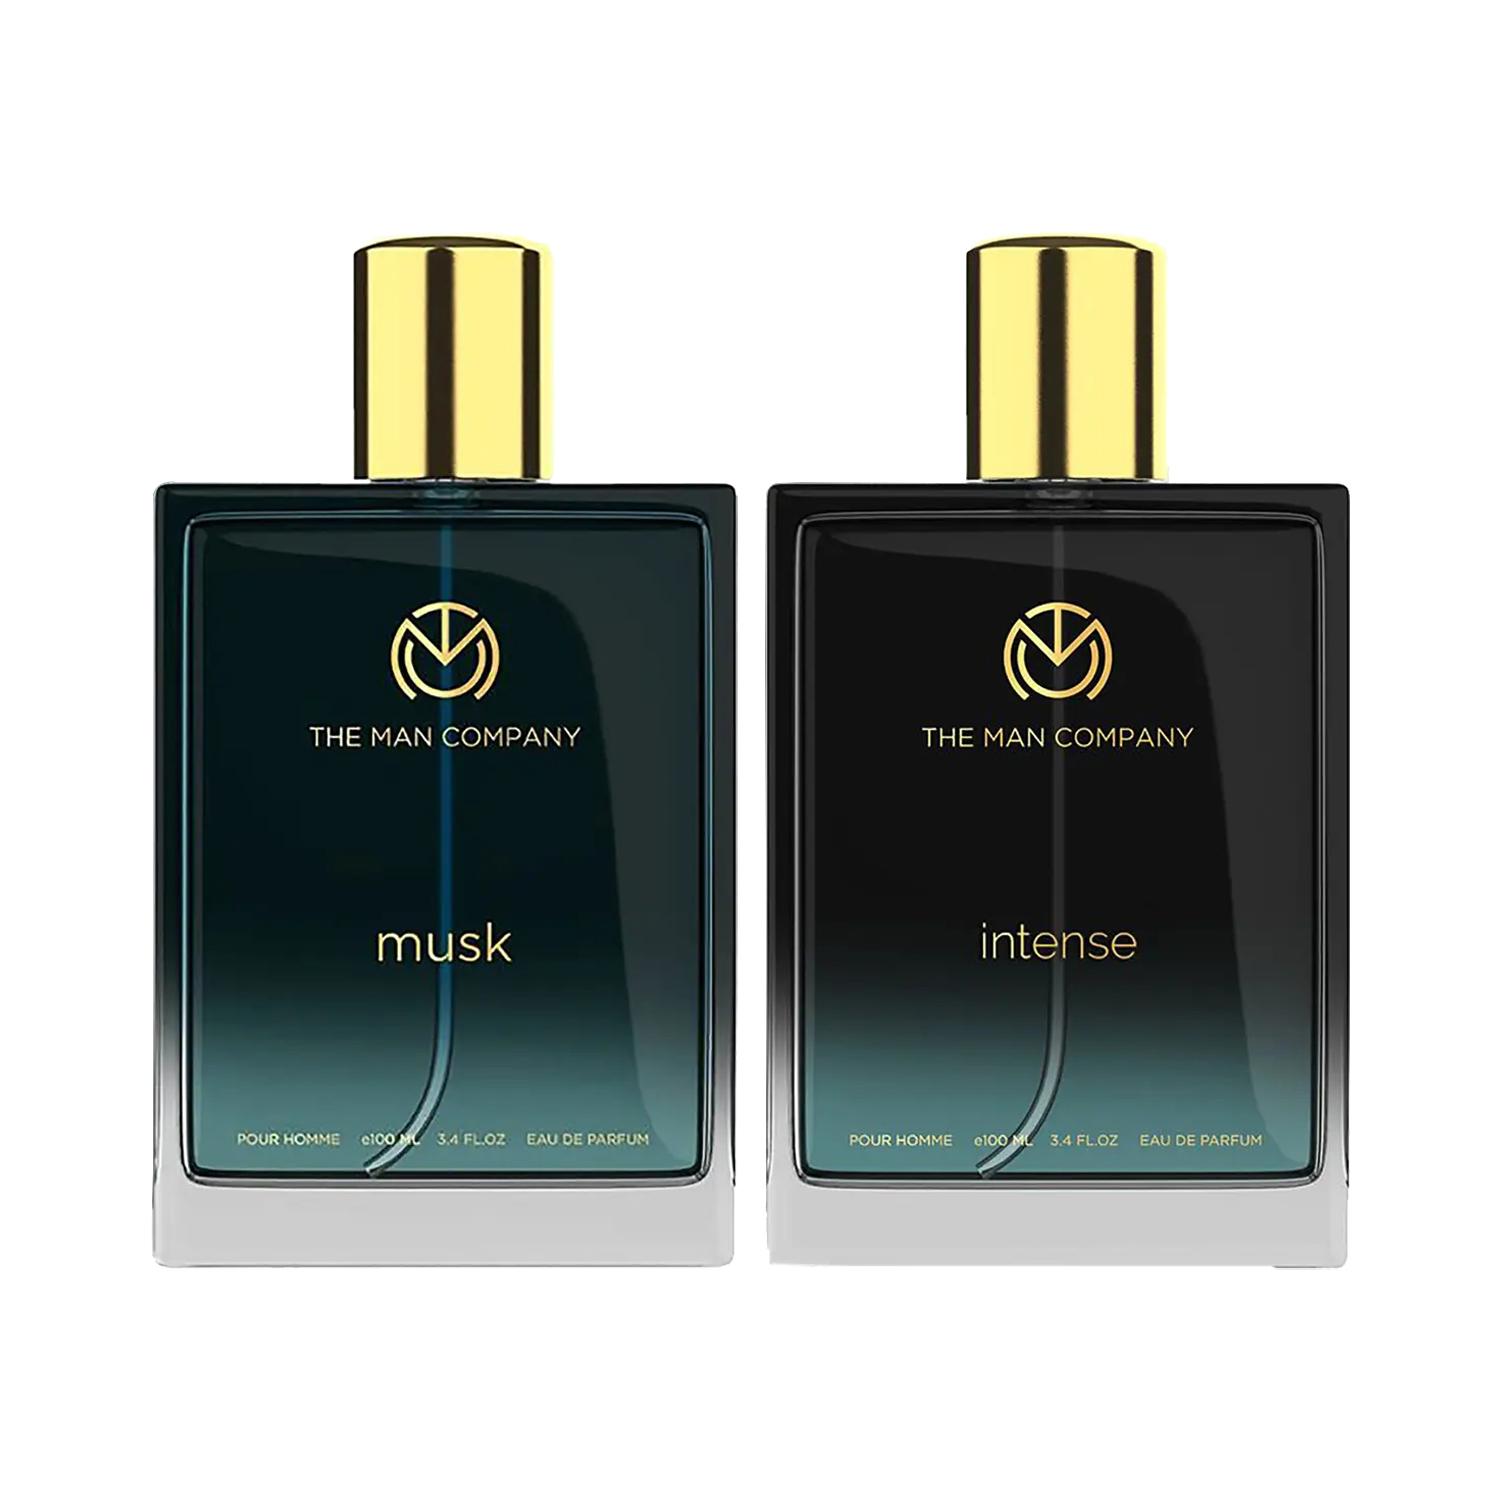 The Man Company | The Man Company Intense Edp Pour Homme & Musk Edp For Men Combo